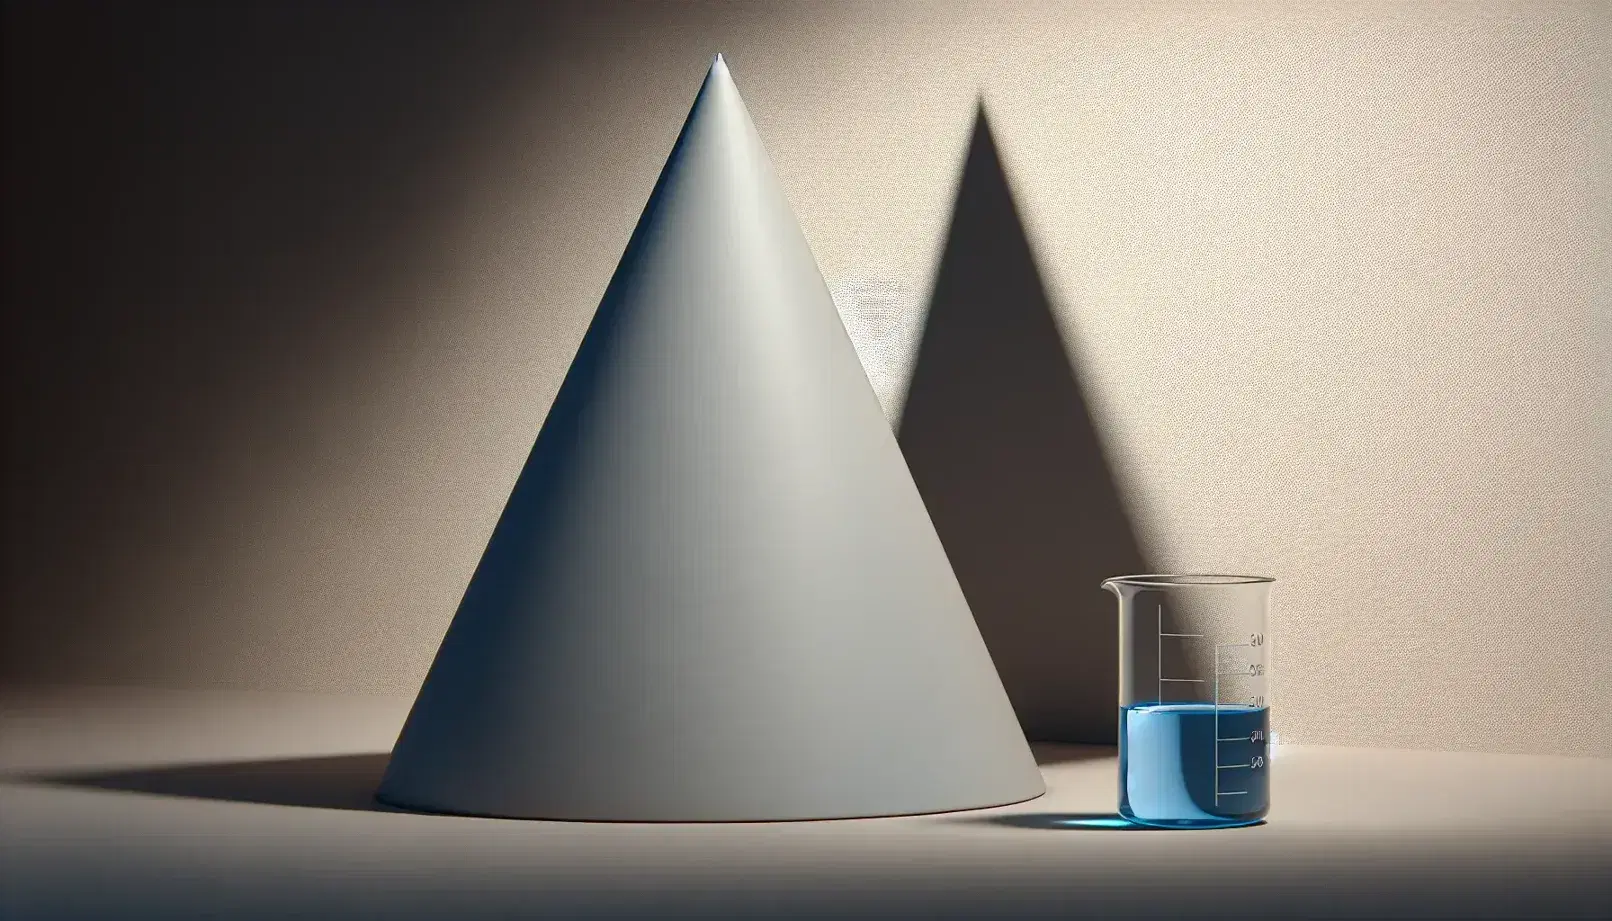 3D model of a gray cone with a sharp apex and circular base beside a half-filled beaker of blue liquid on a wooden table, casting a soft shadow.